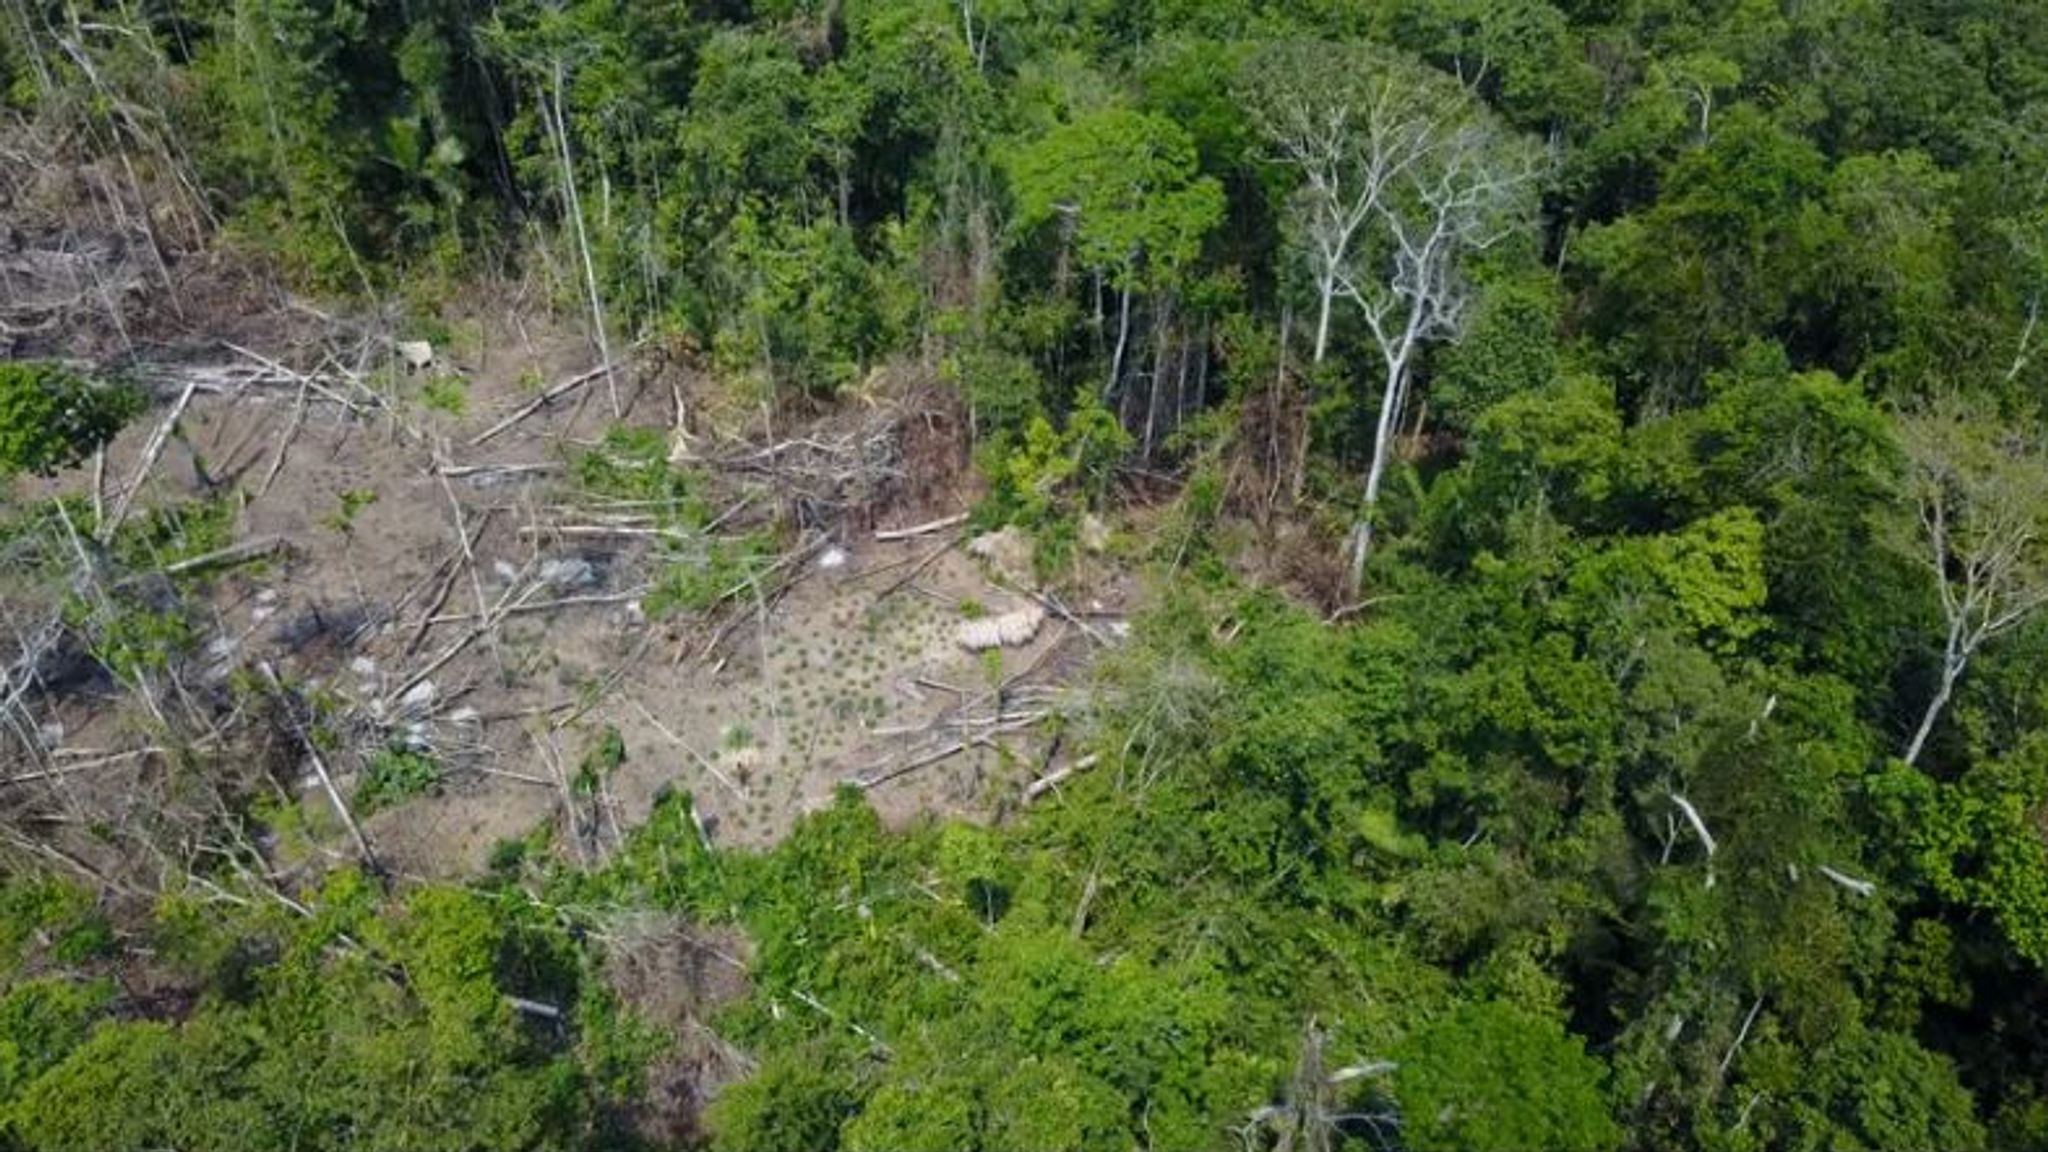 Isolated Amazon jungle tribe captured in drone footage | News | News